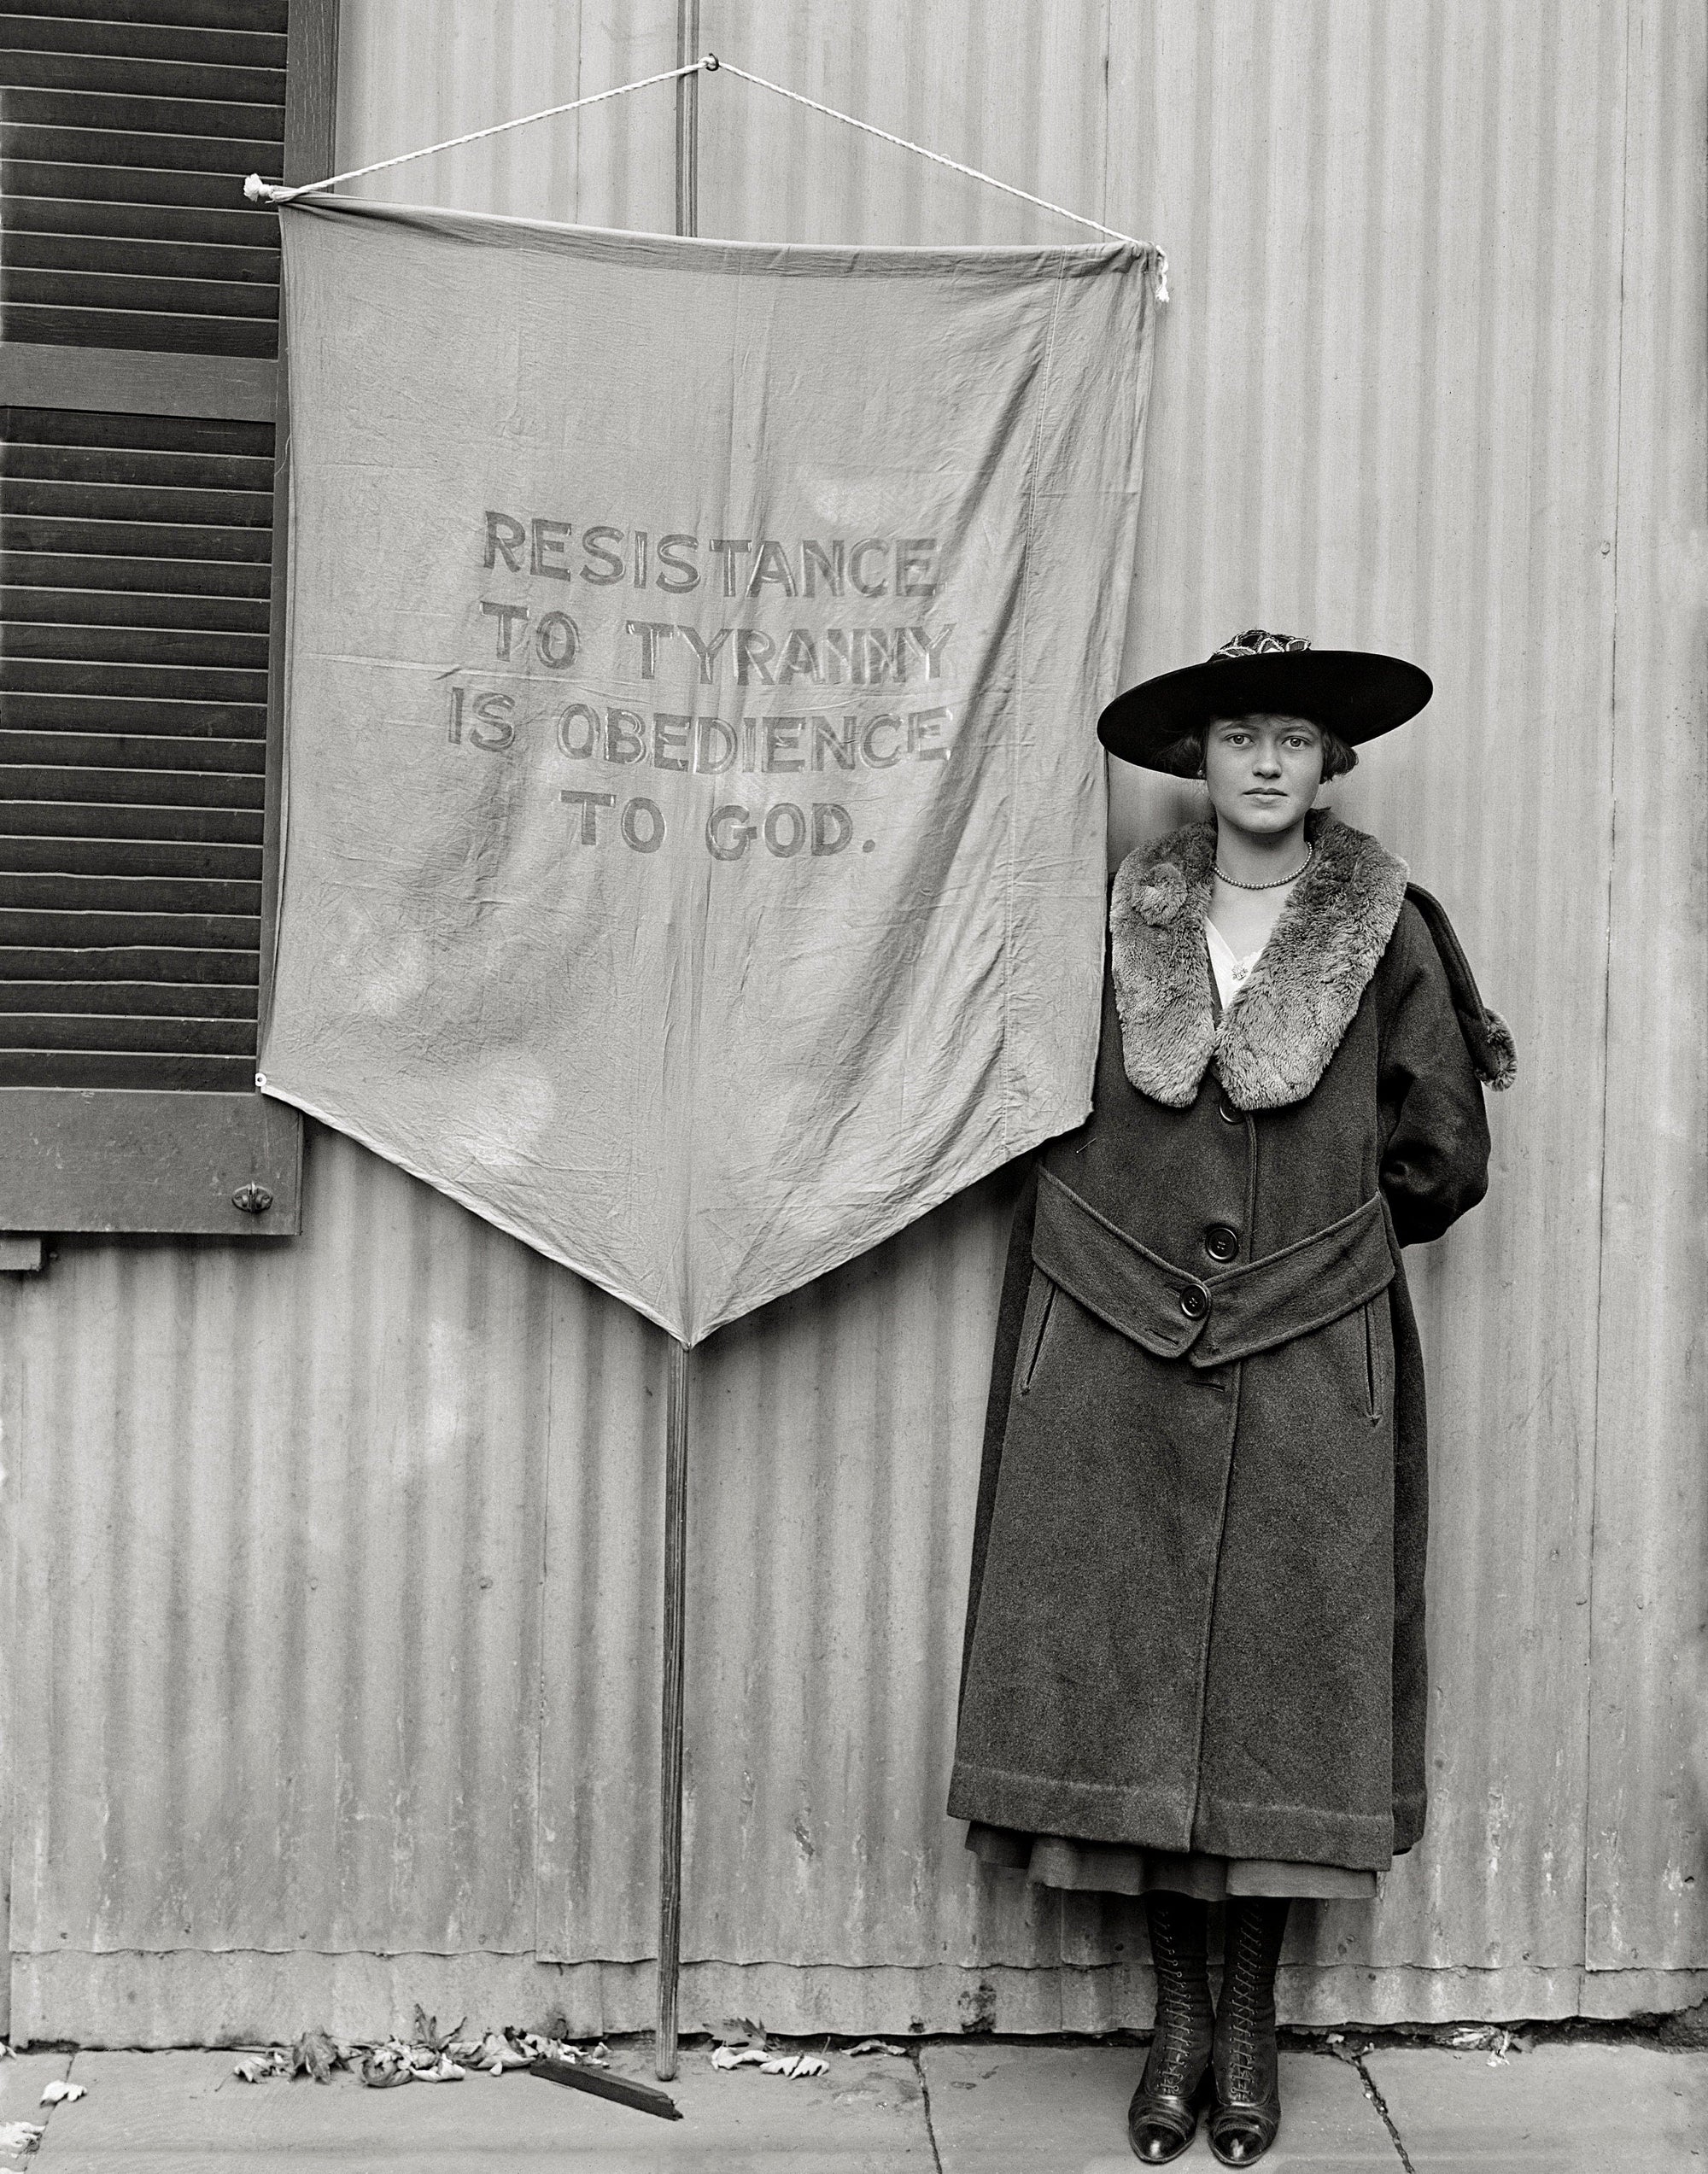 Suffragette Protesting Voting Rights, Equal Rights, 1914 Historical Pix